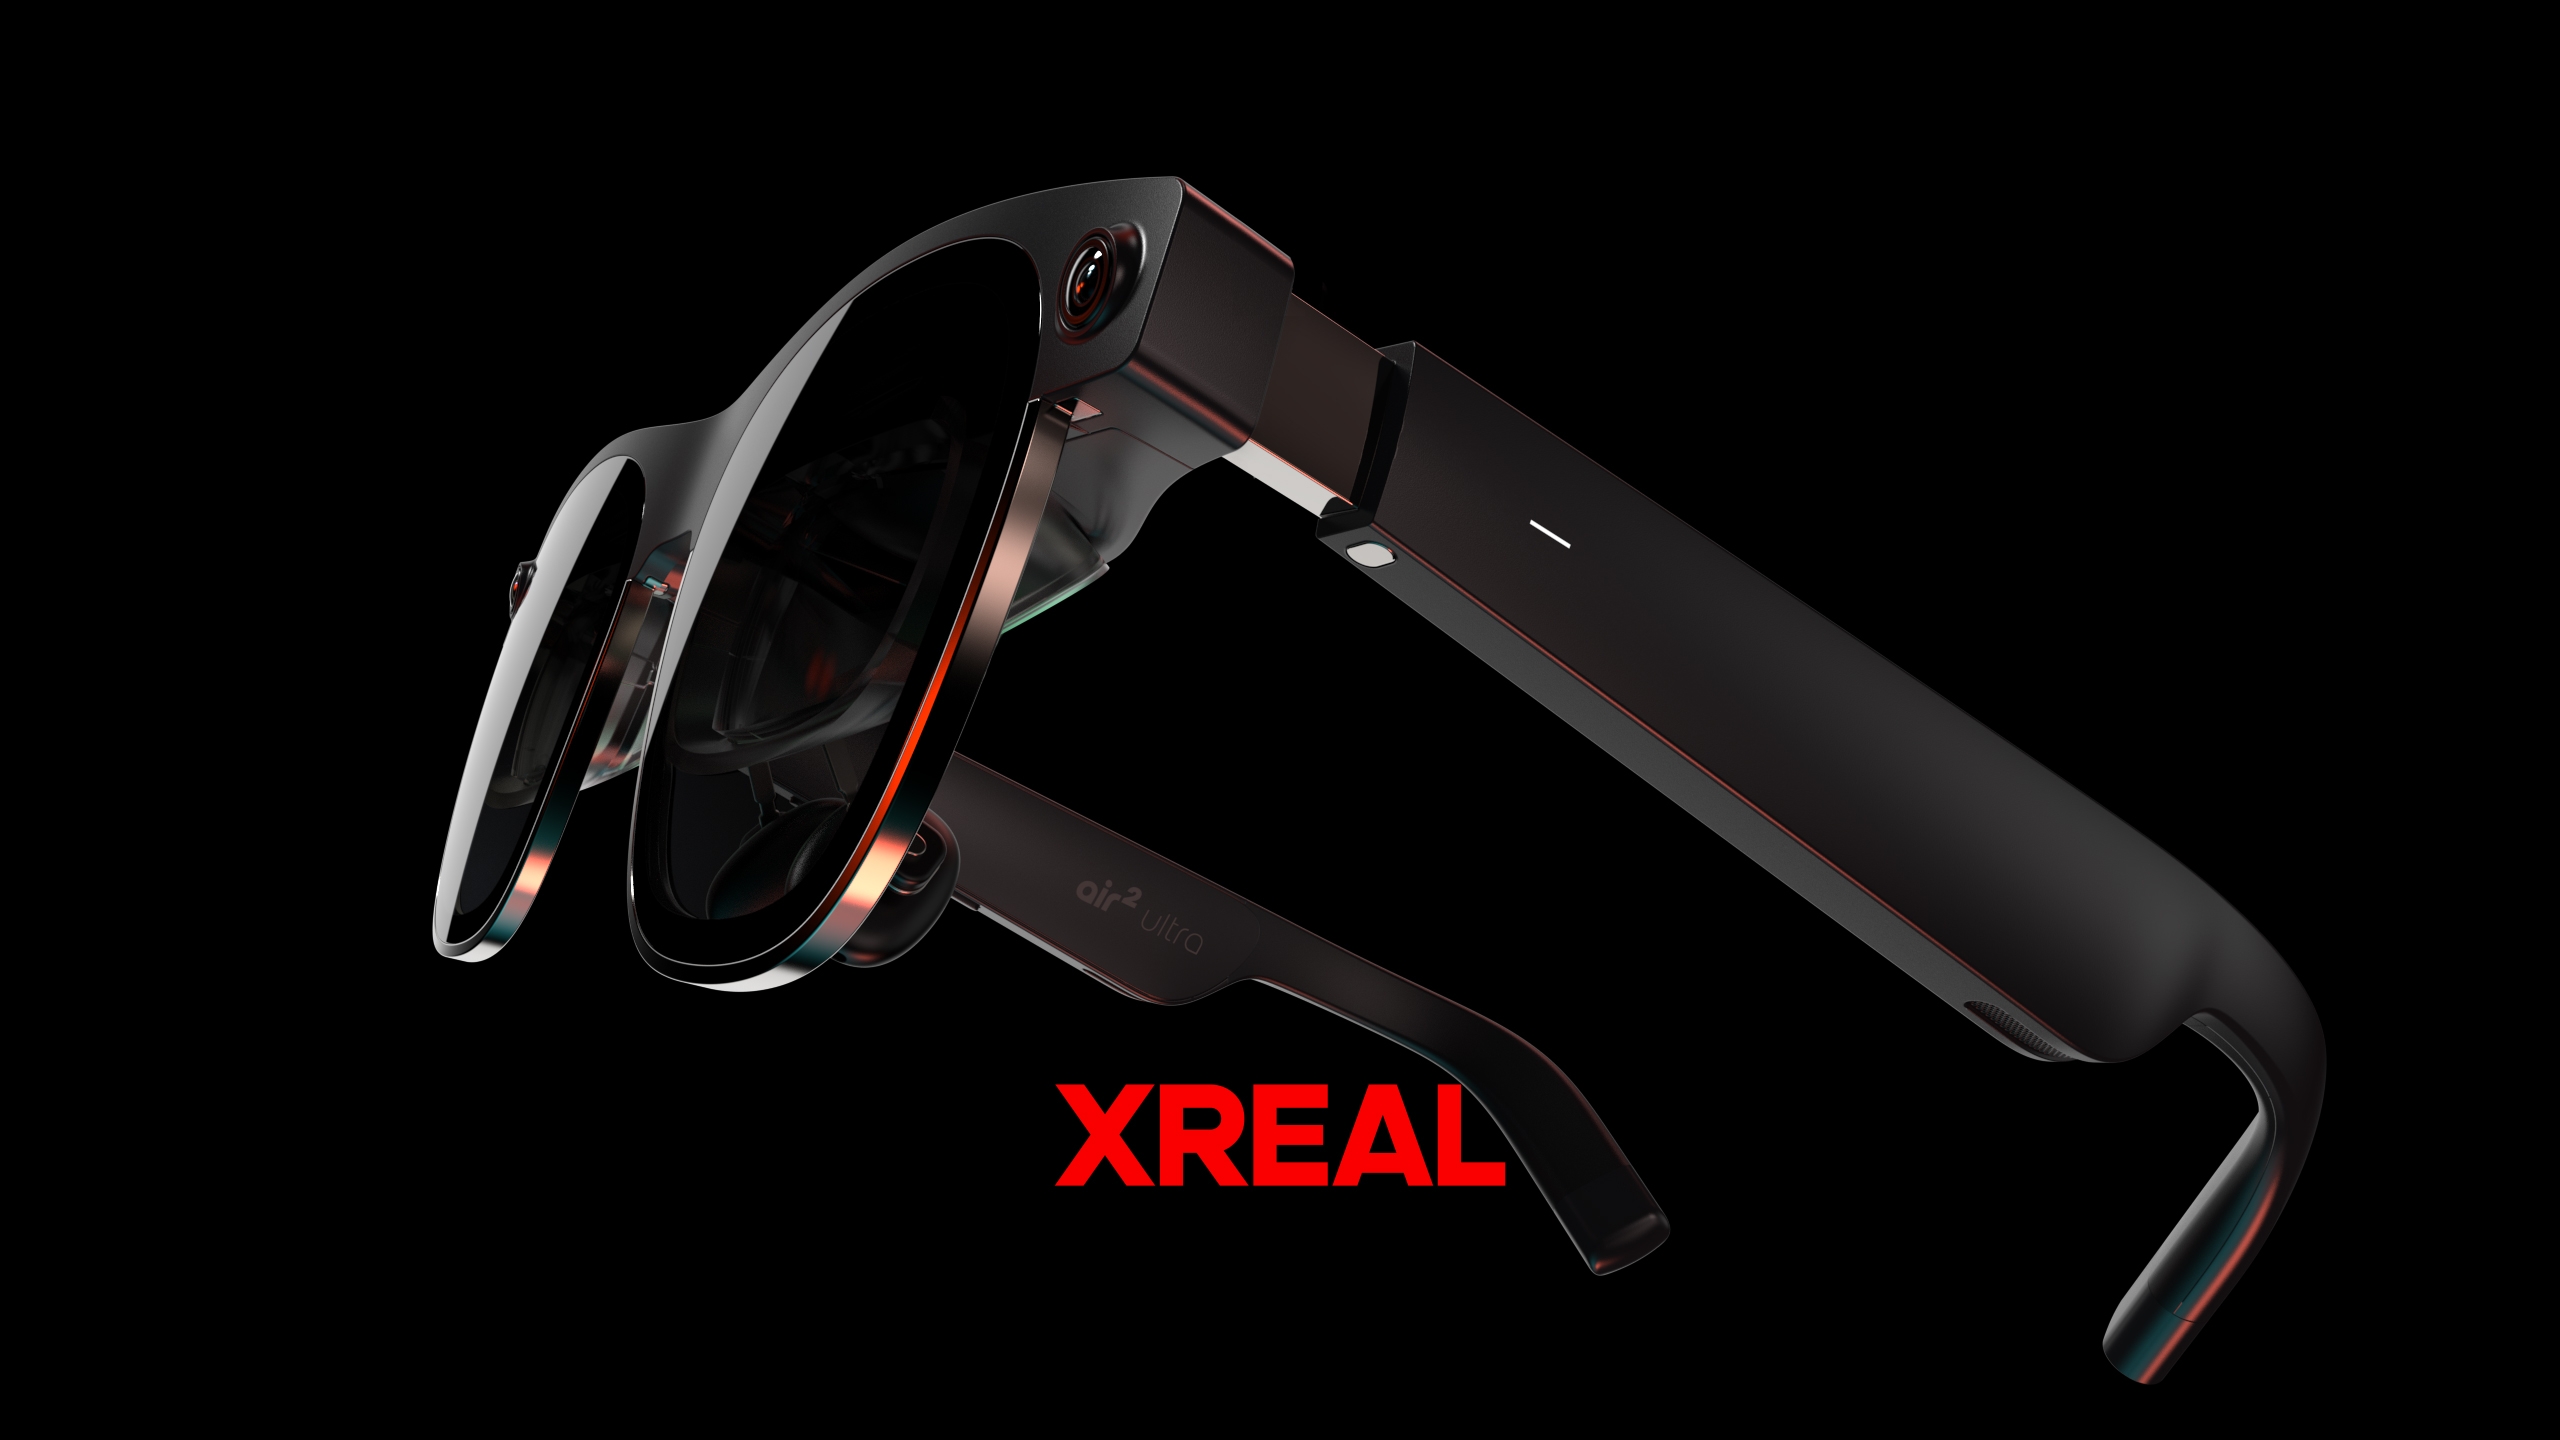 The Xreal Air 2 Ultra floating in front of a black background wqith the word 'Xreal' below them in red